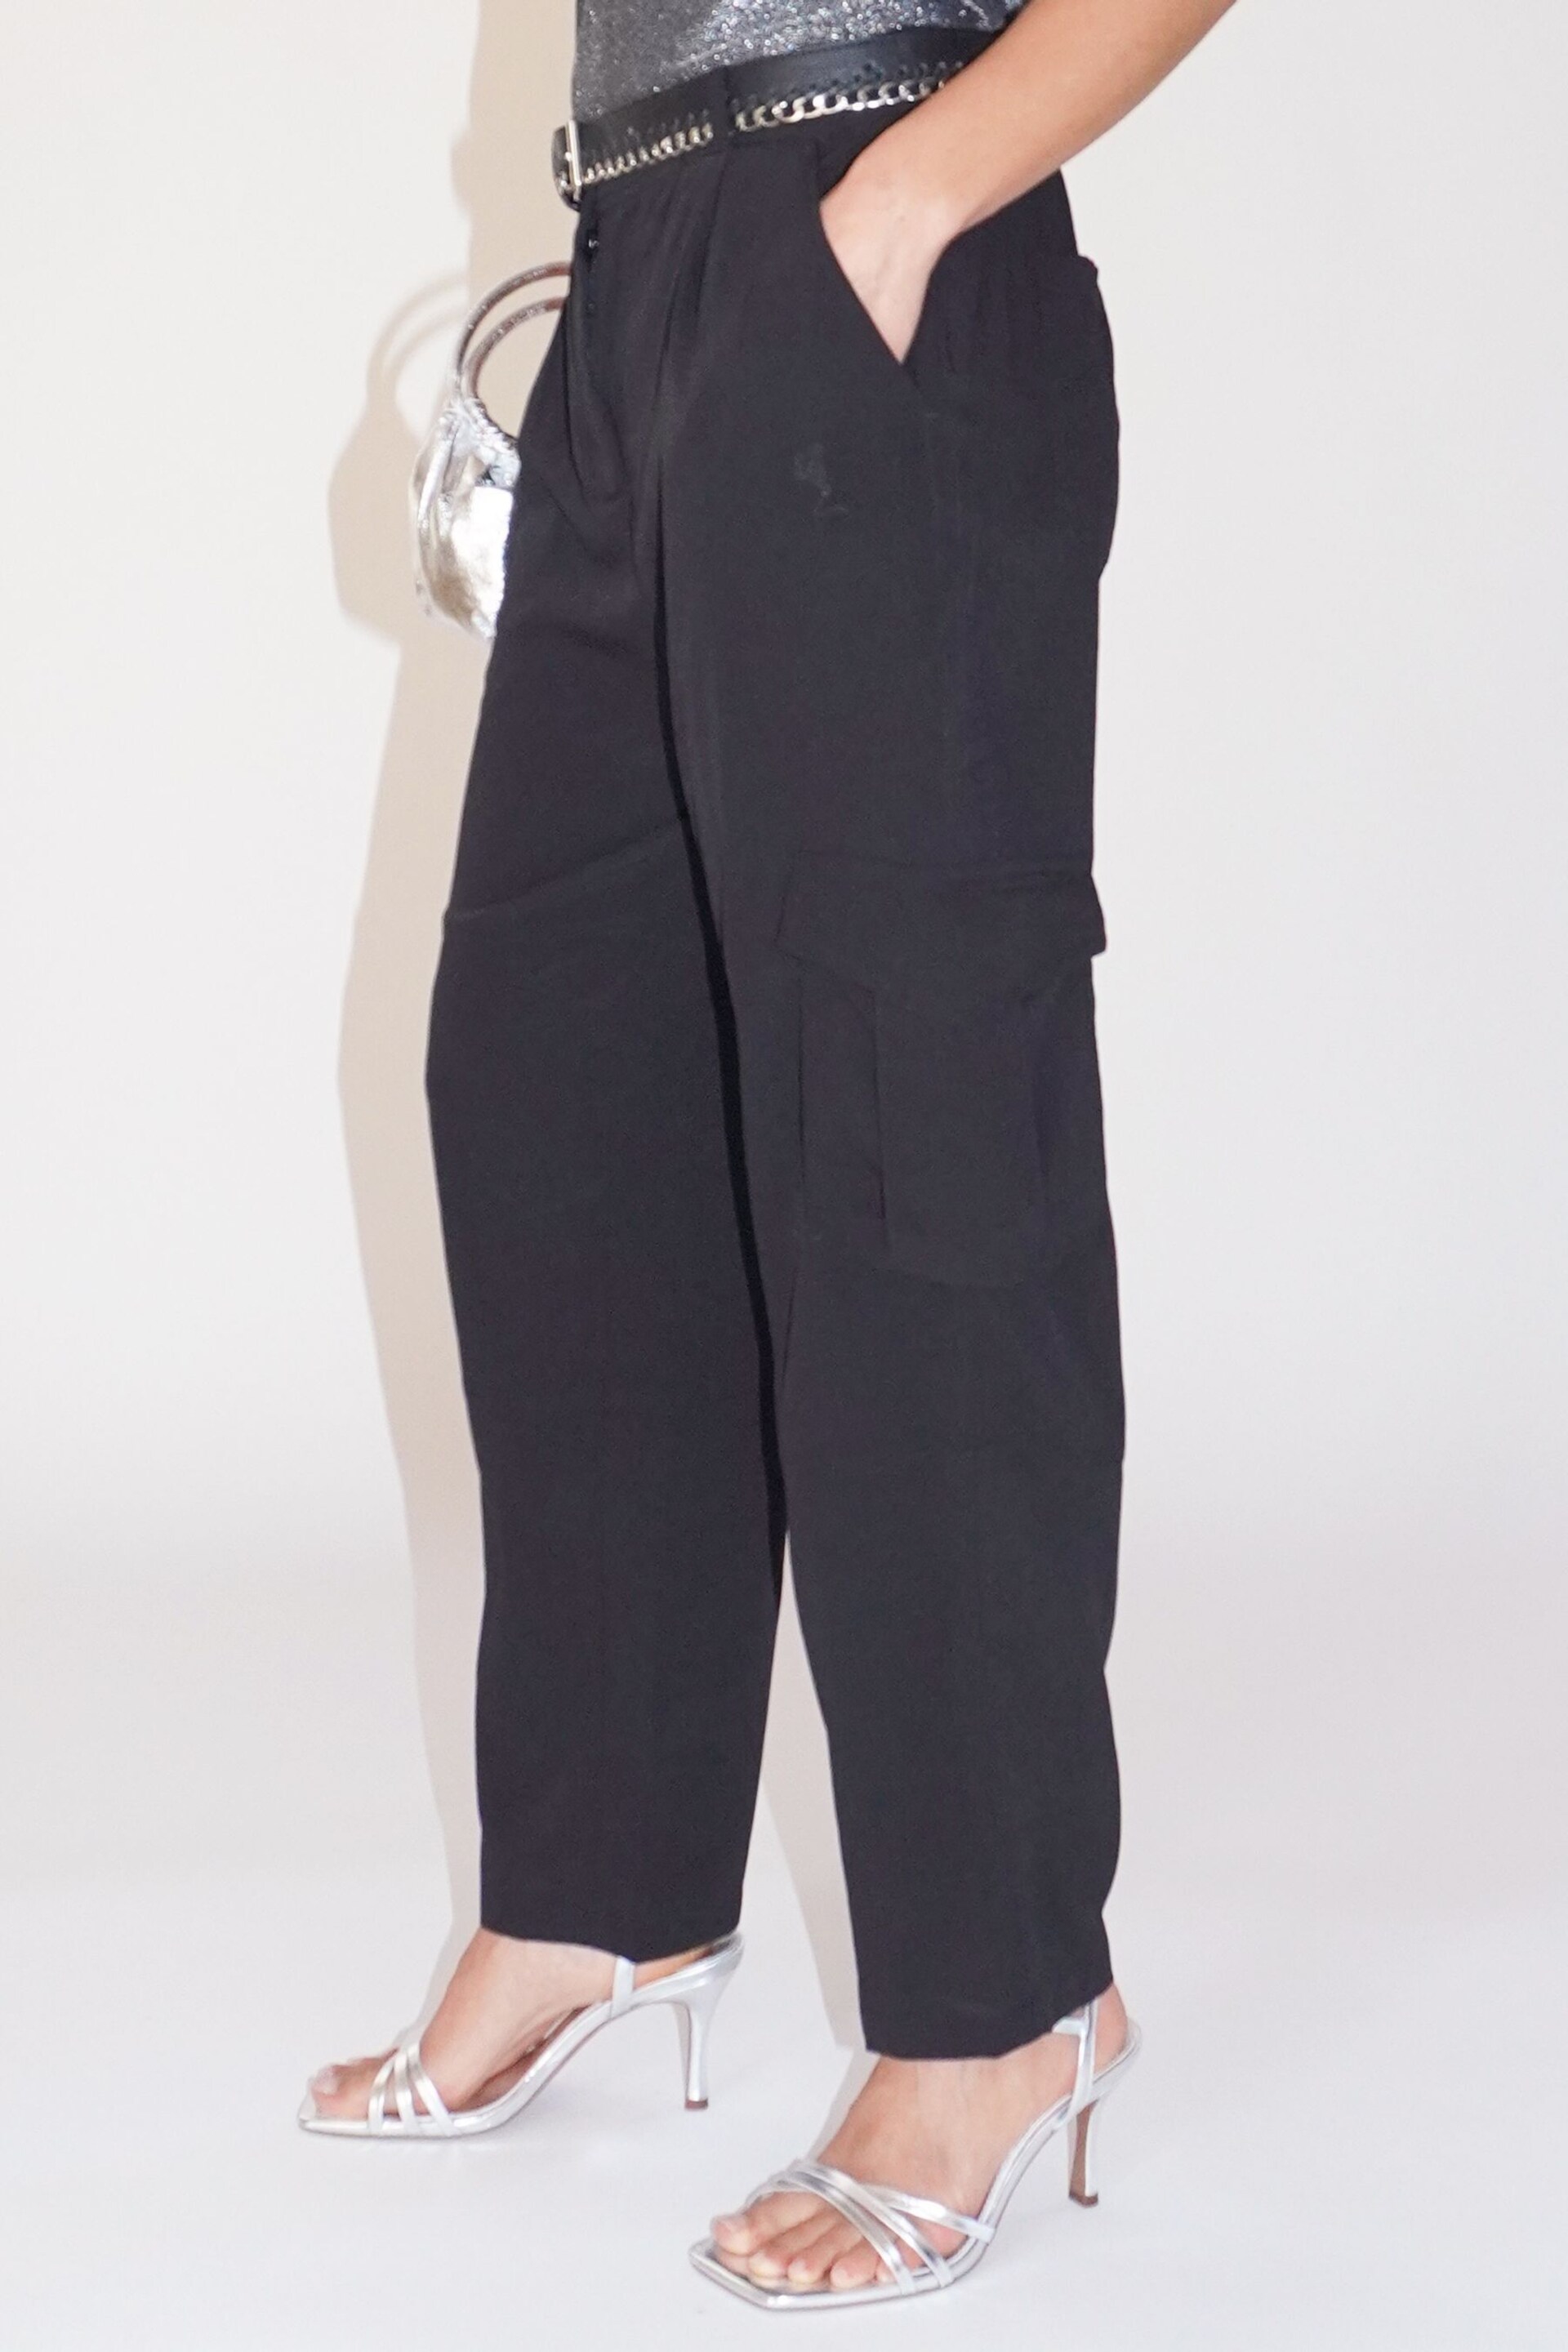 Religion Black Utility Style Ray Cargo Trousers - Image 2 of 5